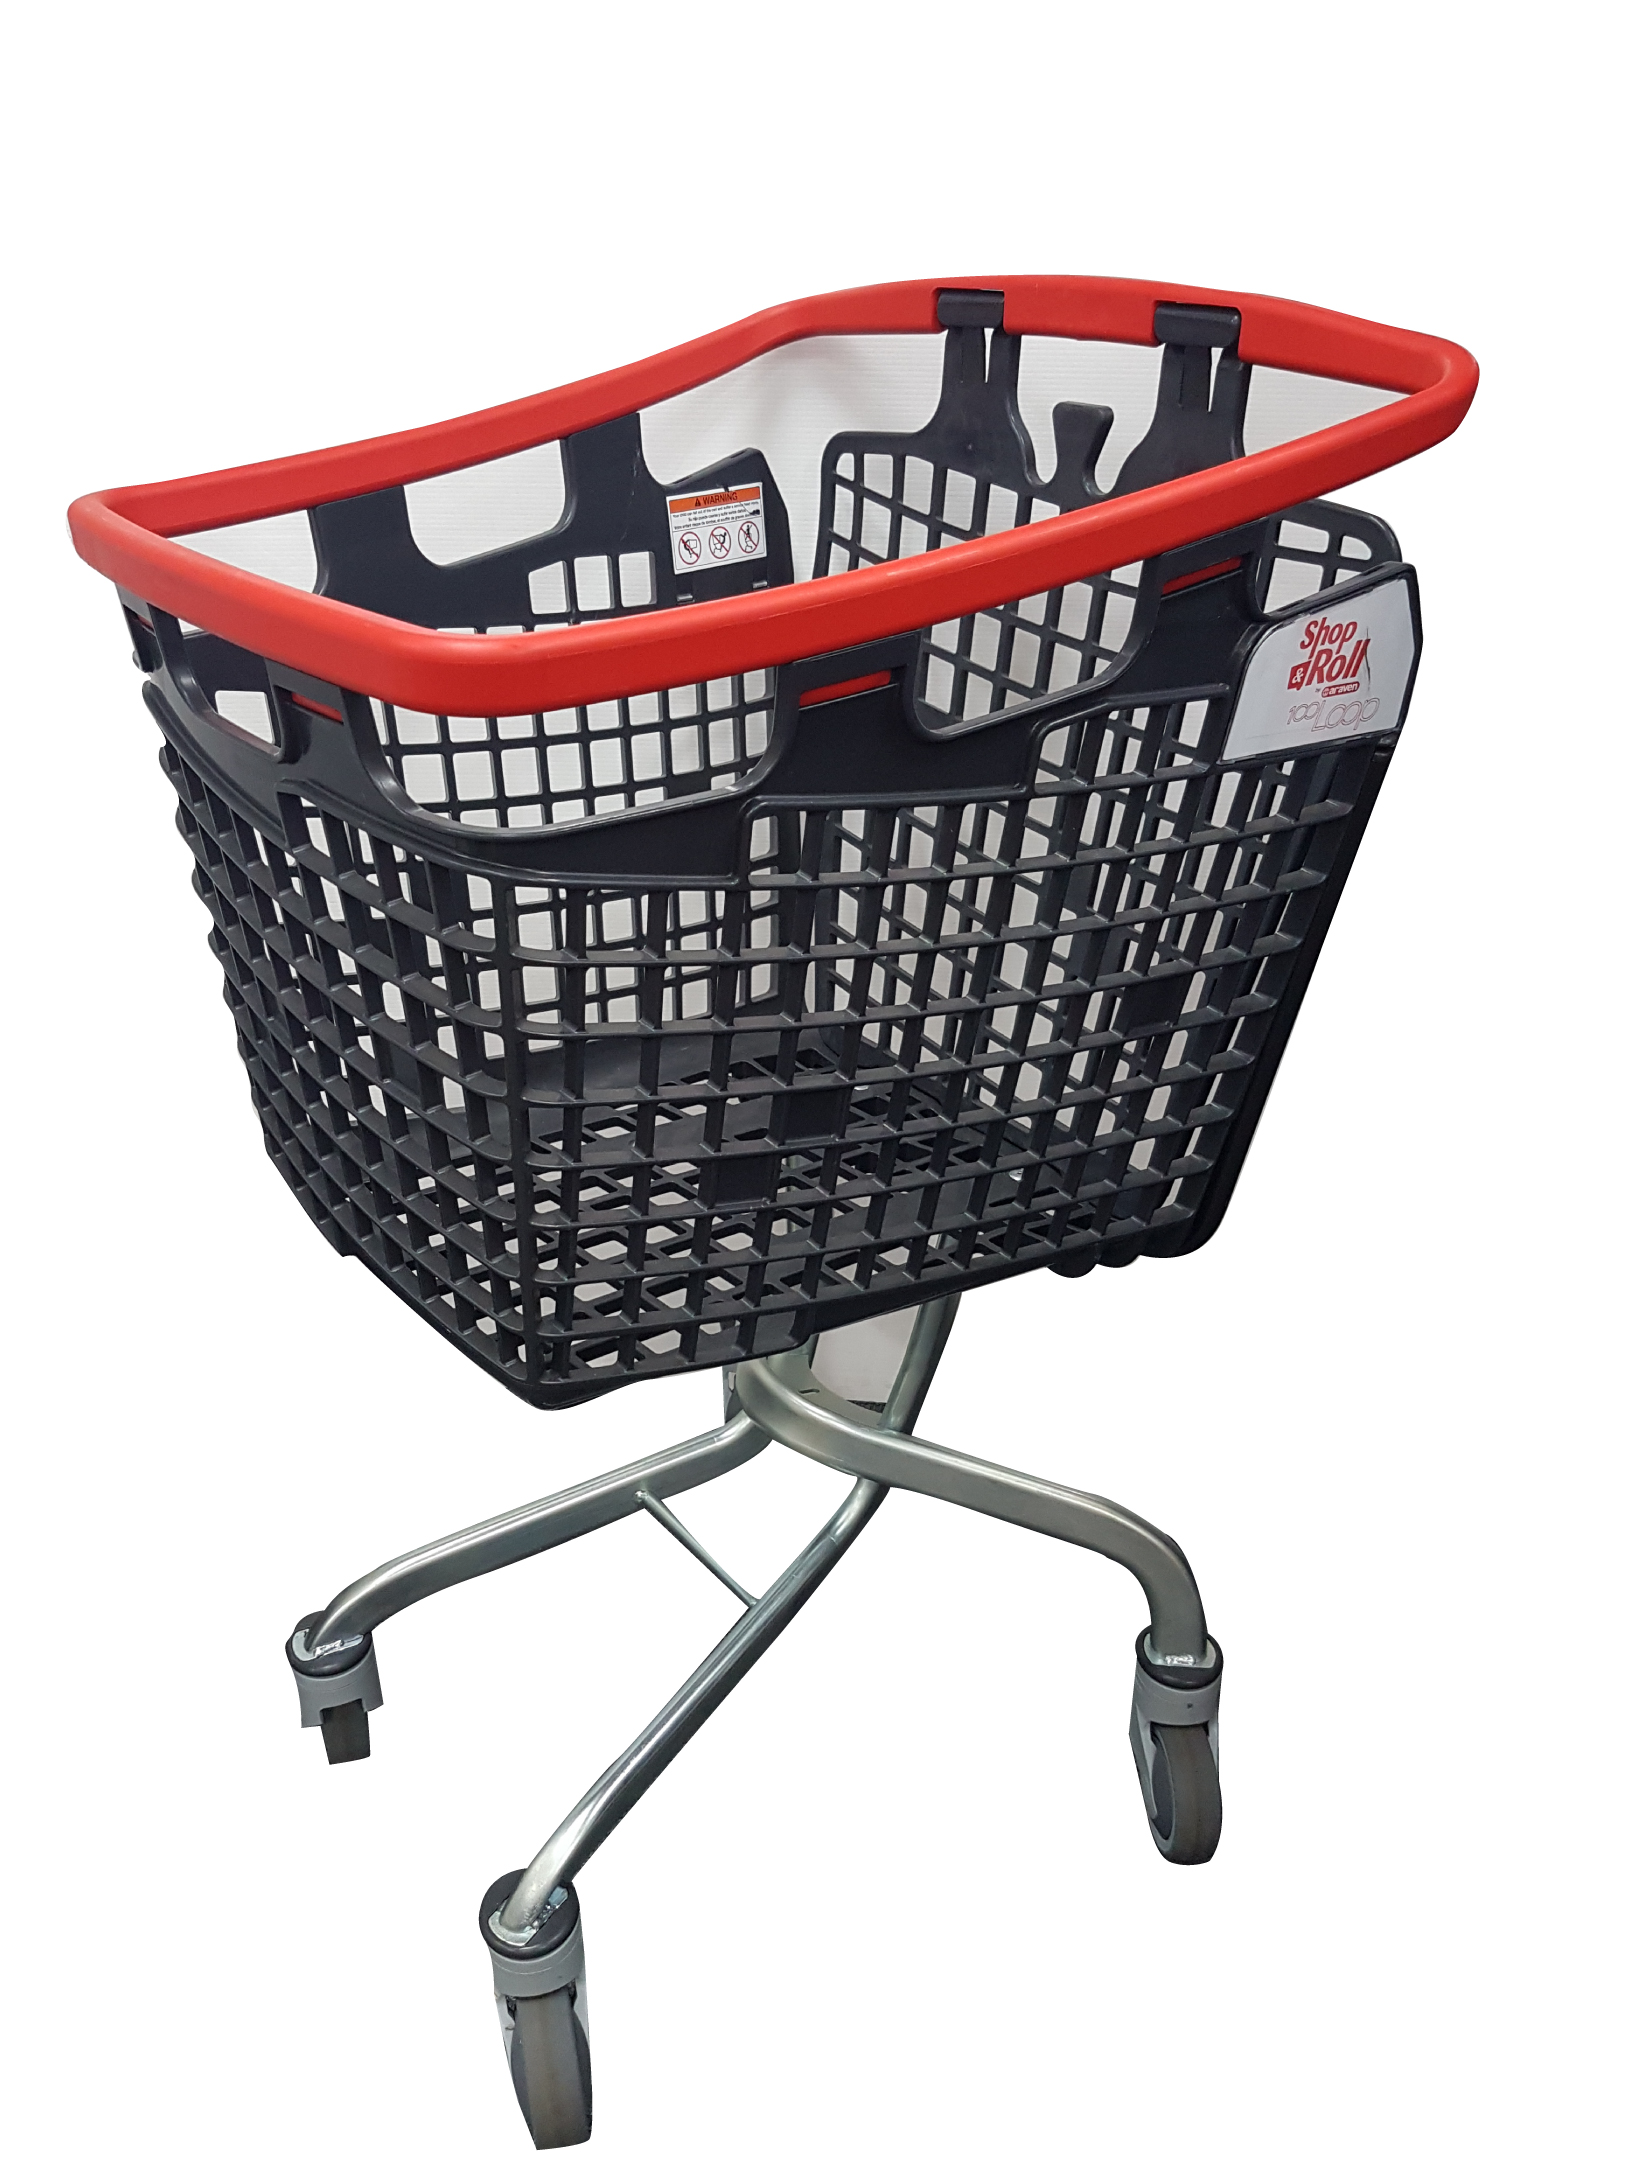 All Products | ARP Group - Retail Shopping Basket Shopping Trolleys